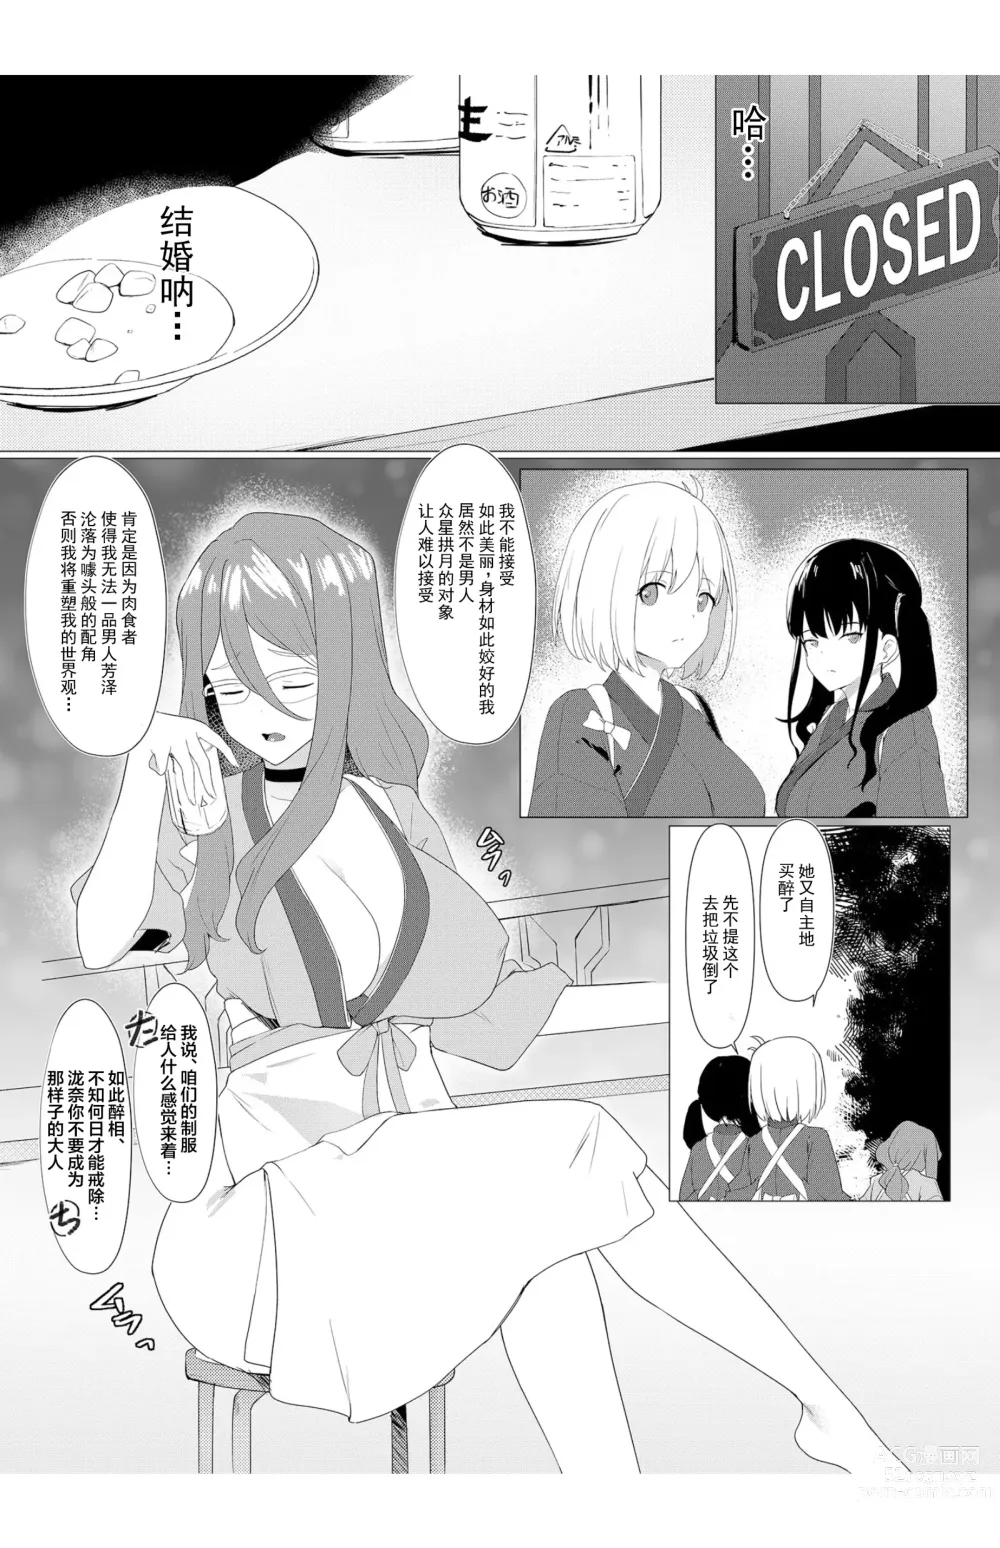 Page 3 of doujinshi 你的心跳 heart beat